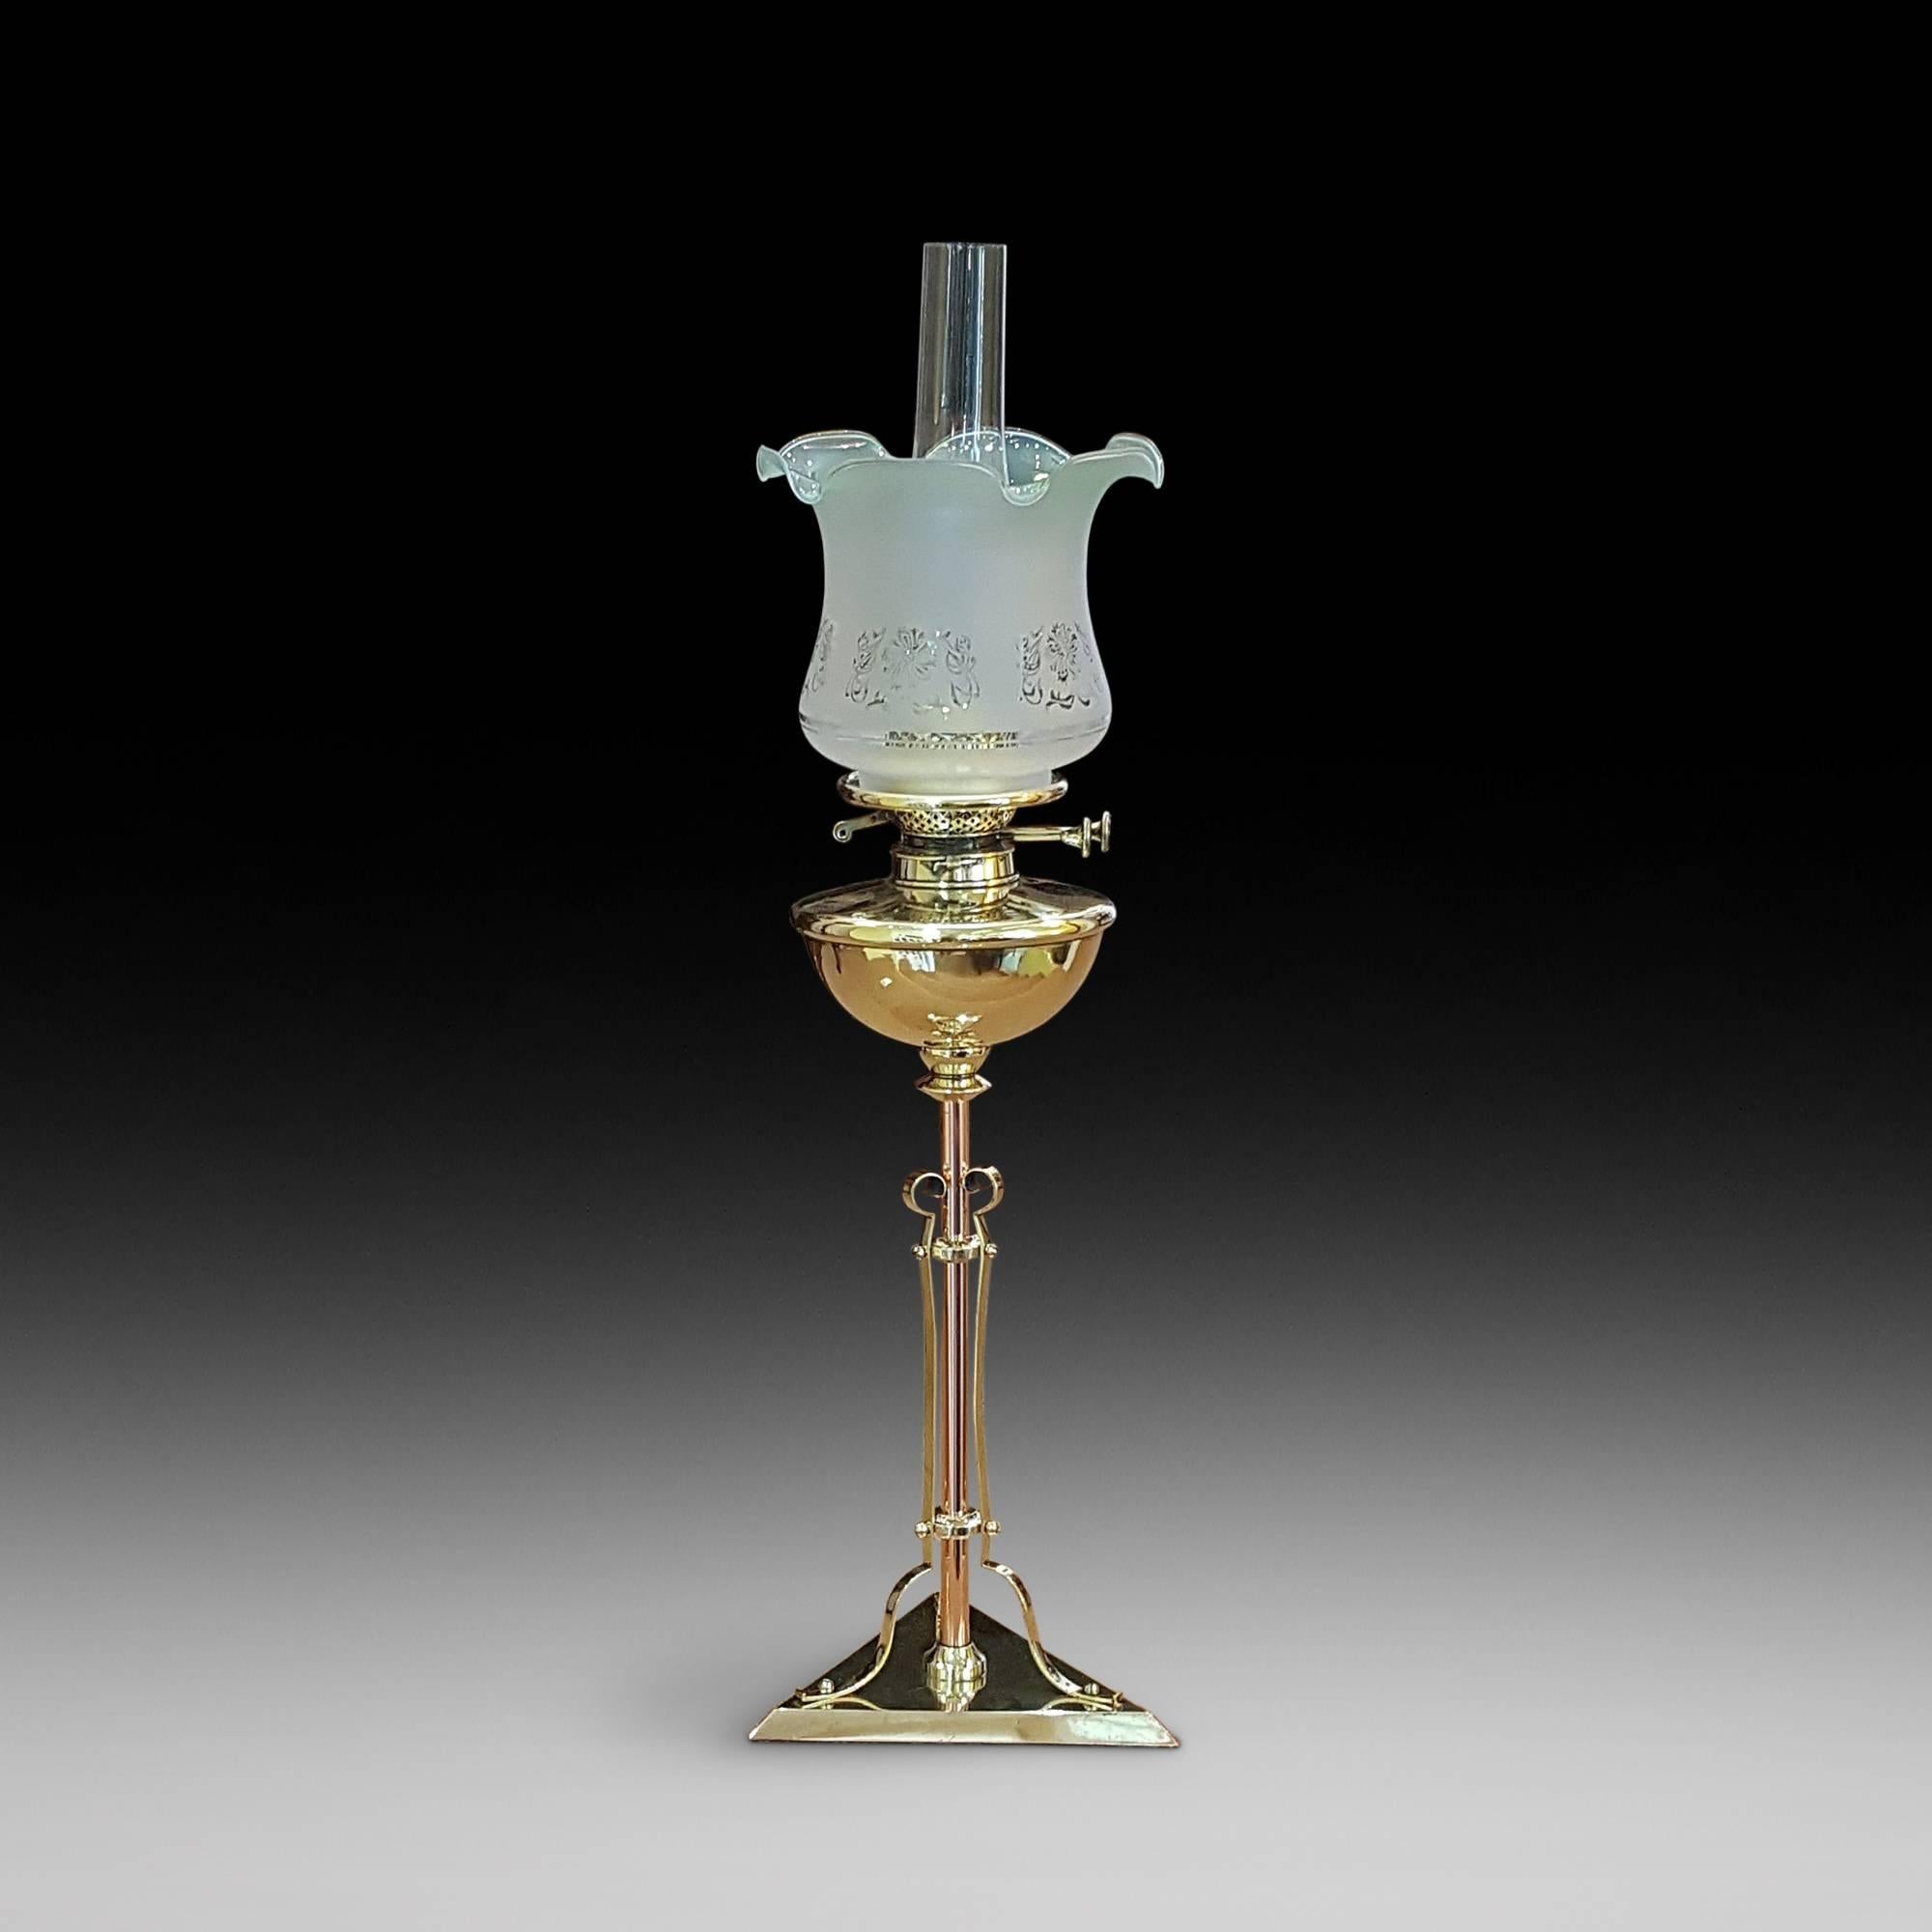 An Art Nouveau copper and brass oil lamp on triangular base extending to a central stem with domed oil receptacle with frosted glass shade and chimney - a platform has been added for a battery operated LED light.
Measures: 29